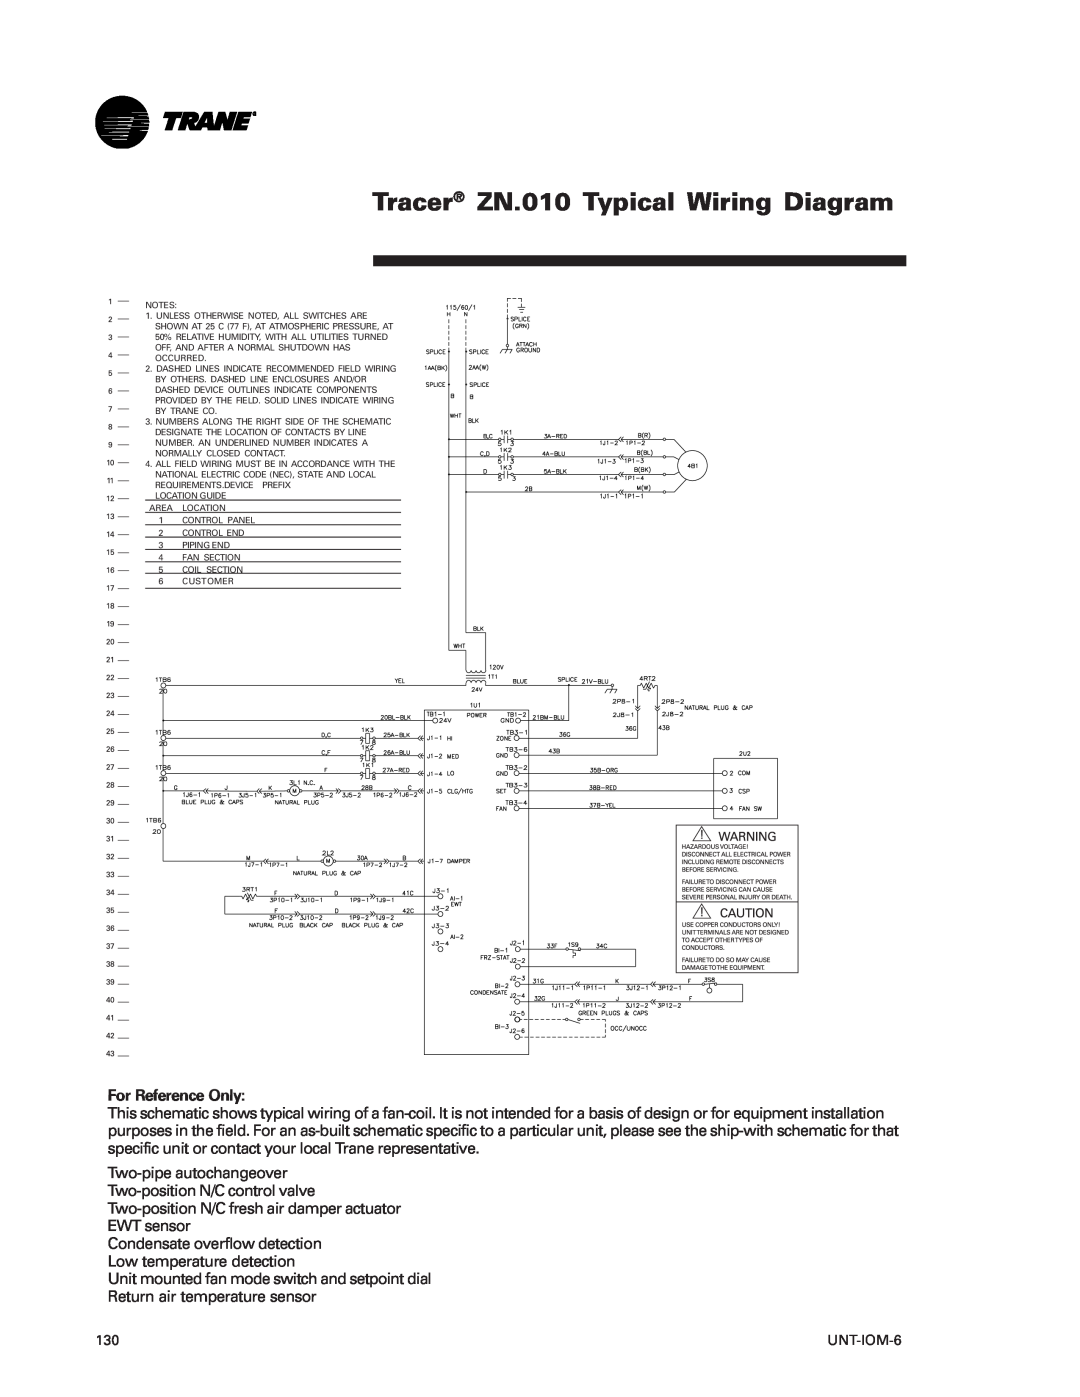 Trane LO manual Tracer ZN.010 Typical Wiring Diagram, For Reference Only 